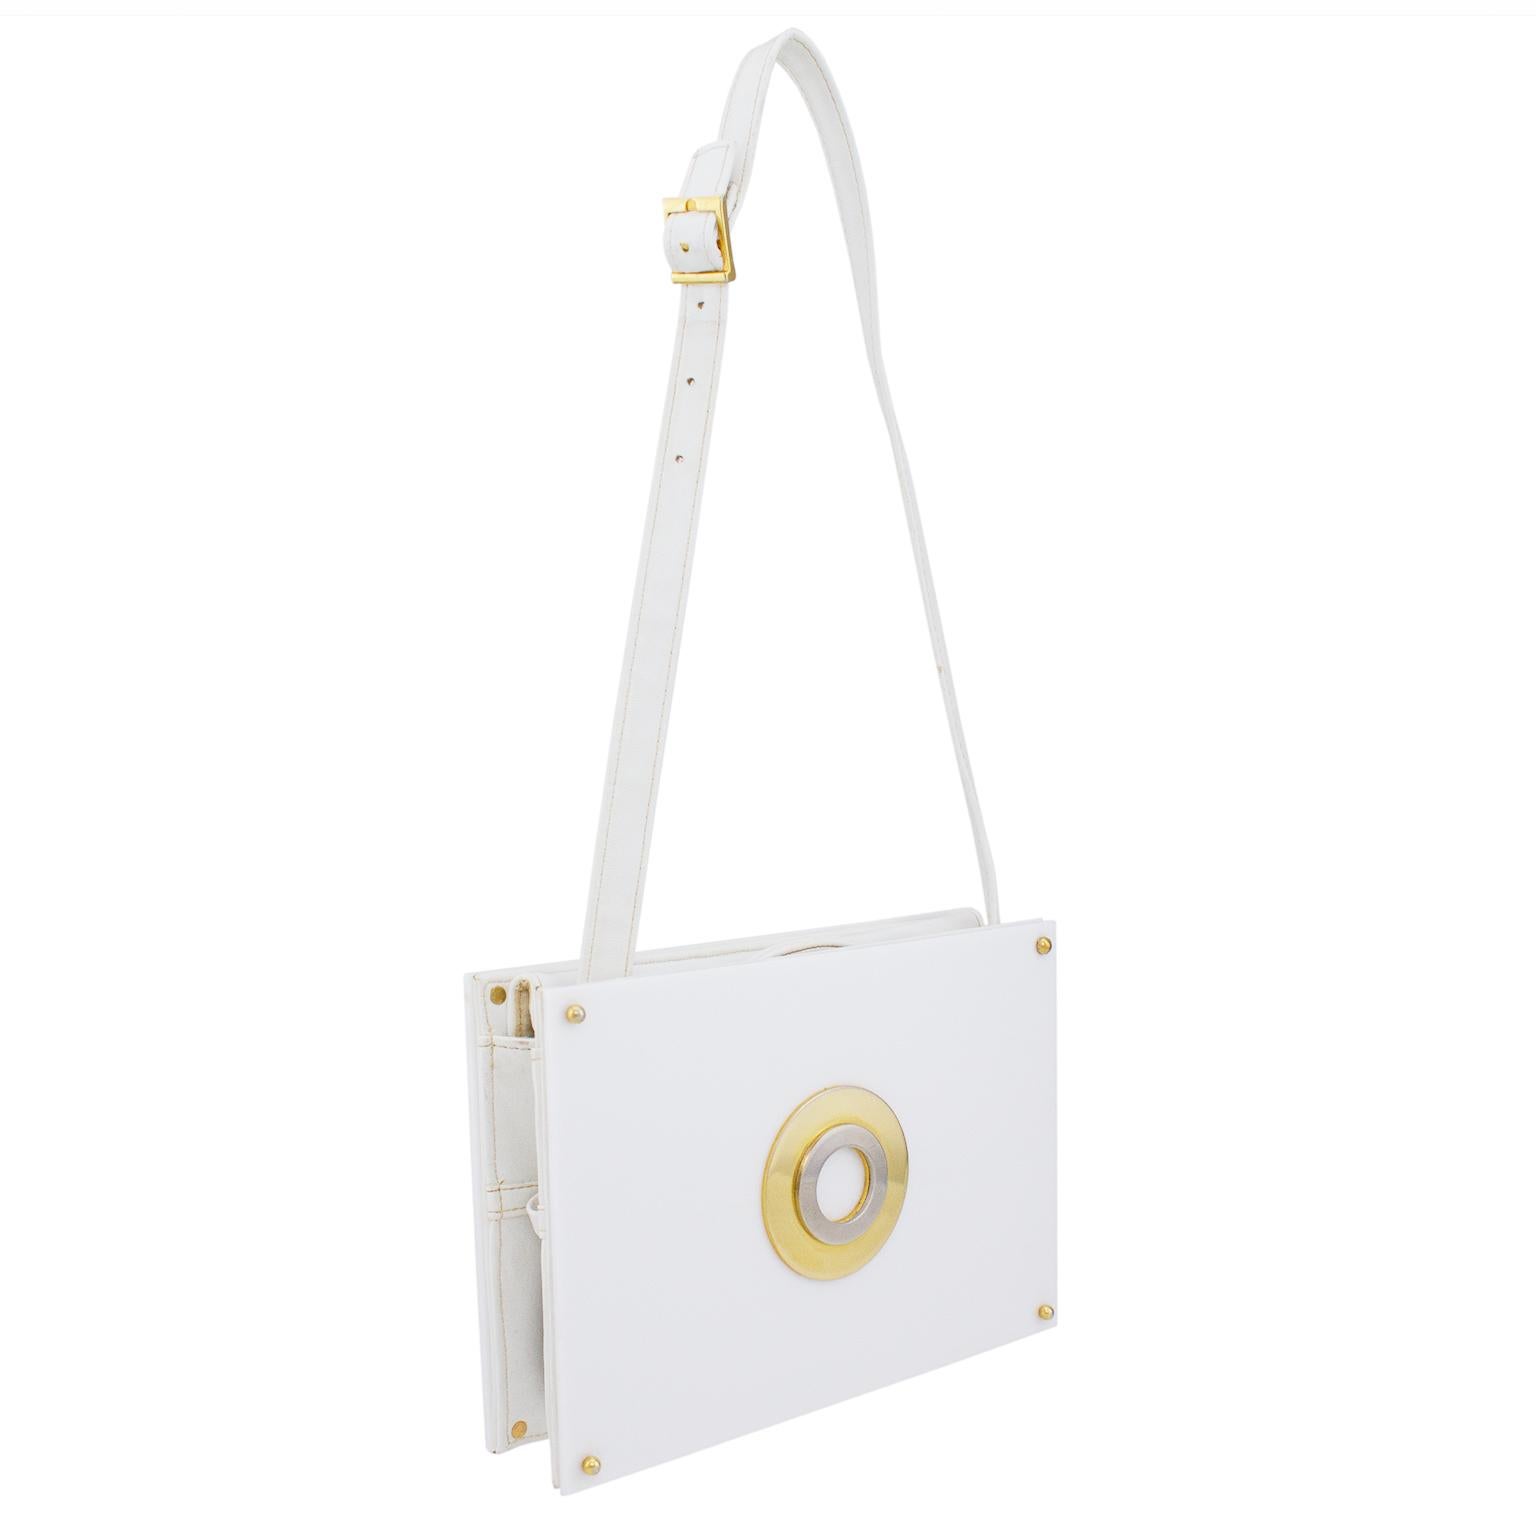 Very fun and ultra mod 1960s Saks Fifth Avenue bag. White hard plastic with adjustable and removable white leather strap and interior. Circular gold and silver detail on front and gold hardware throughout. Very good vintage condition, normal signs